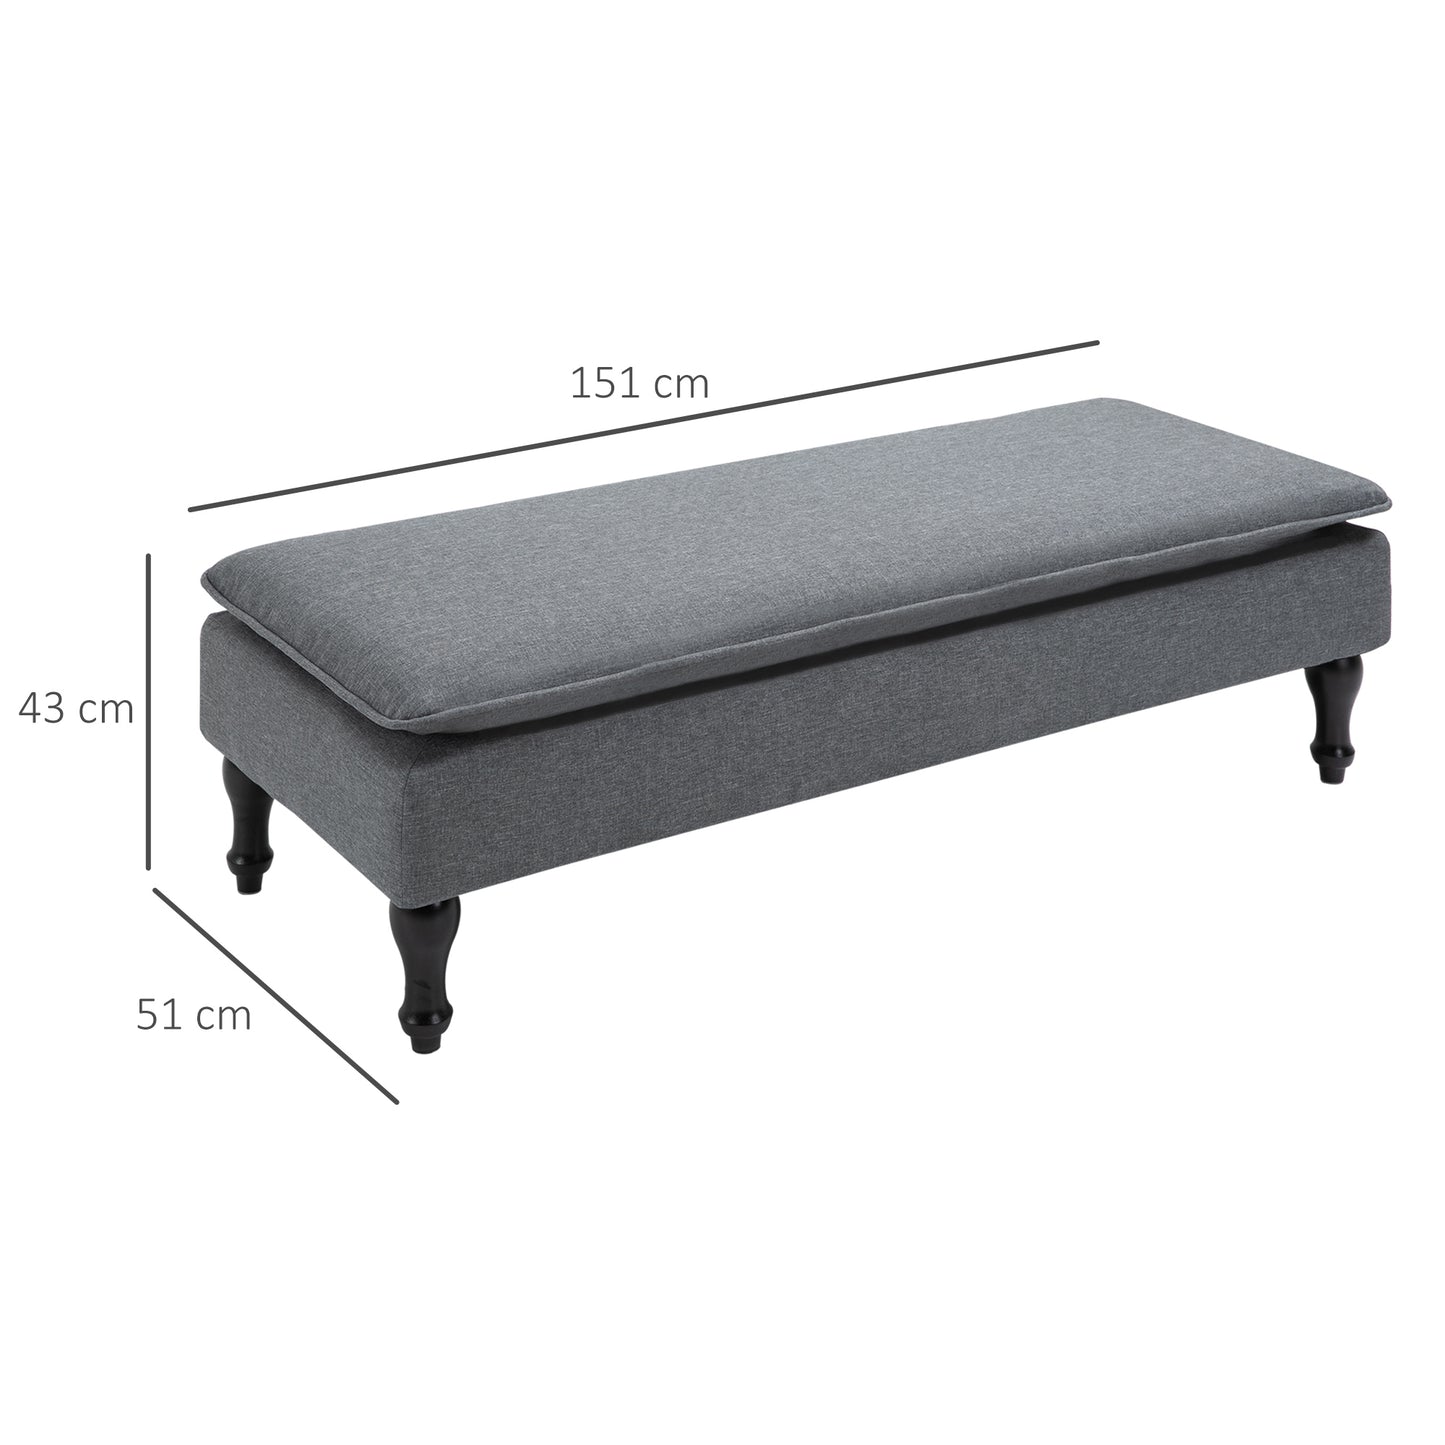 HOMCOM Footstool Ottoman Bed-End Bench Upholstered Linen-Touch Fabric Stool Footrest